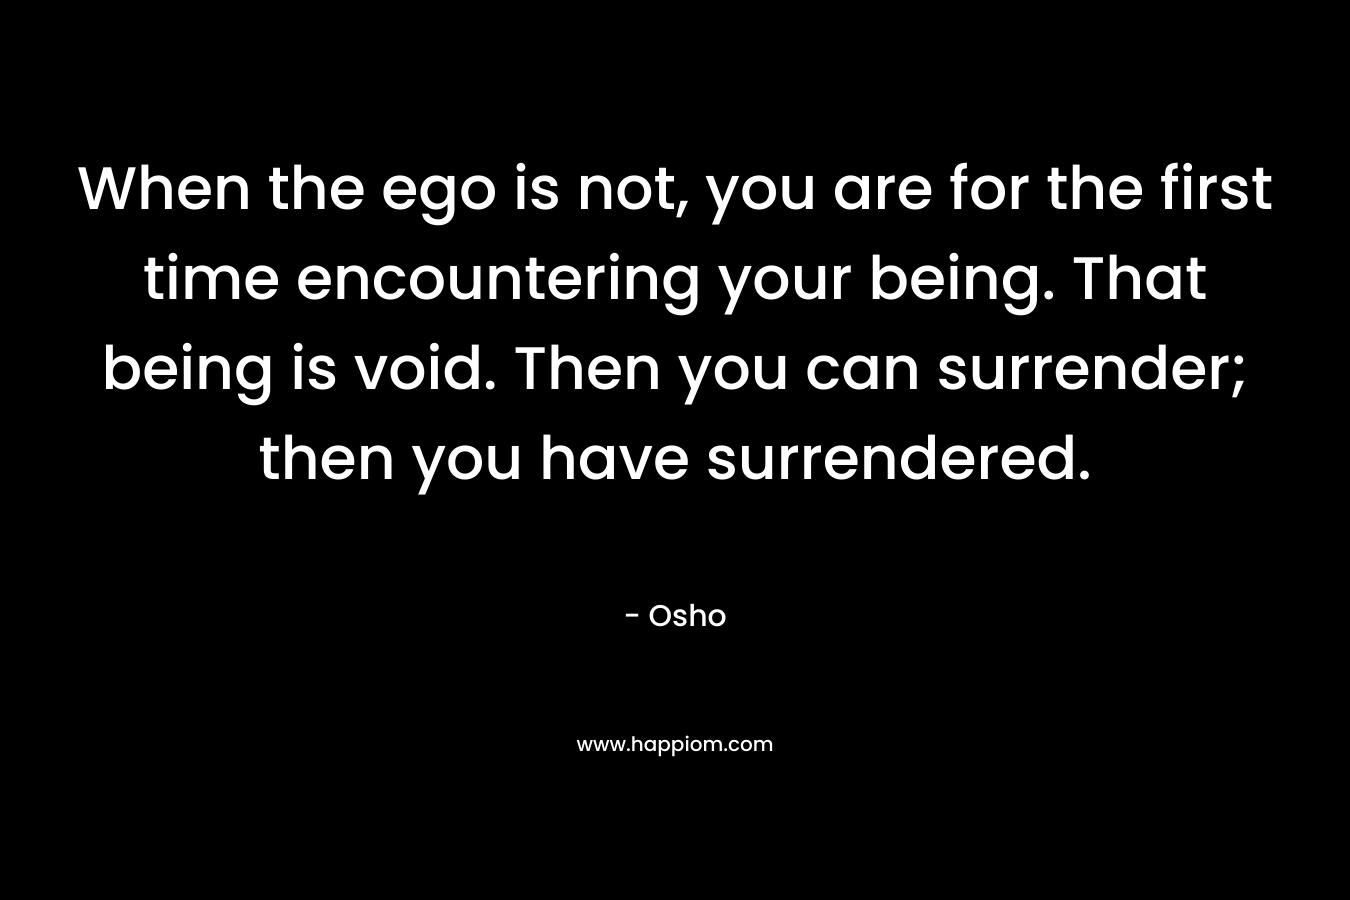 When the ego is not, you are for the first time encountering your being. That being is void. Then you can surrender; then you have surrendered. – Osho